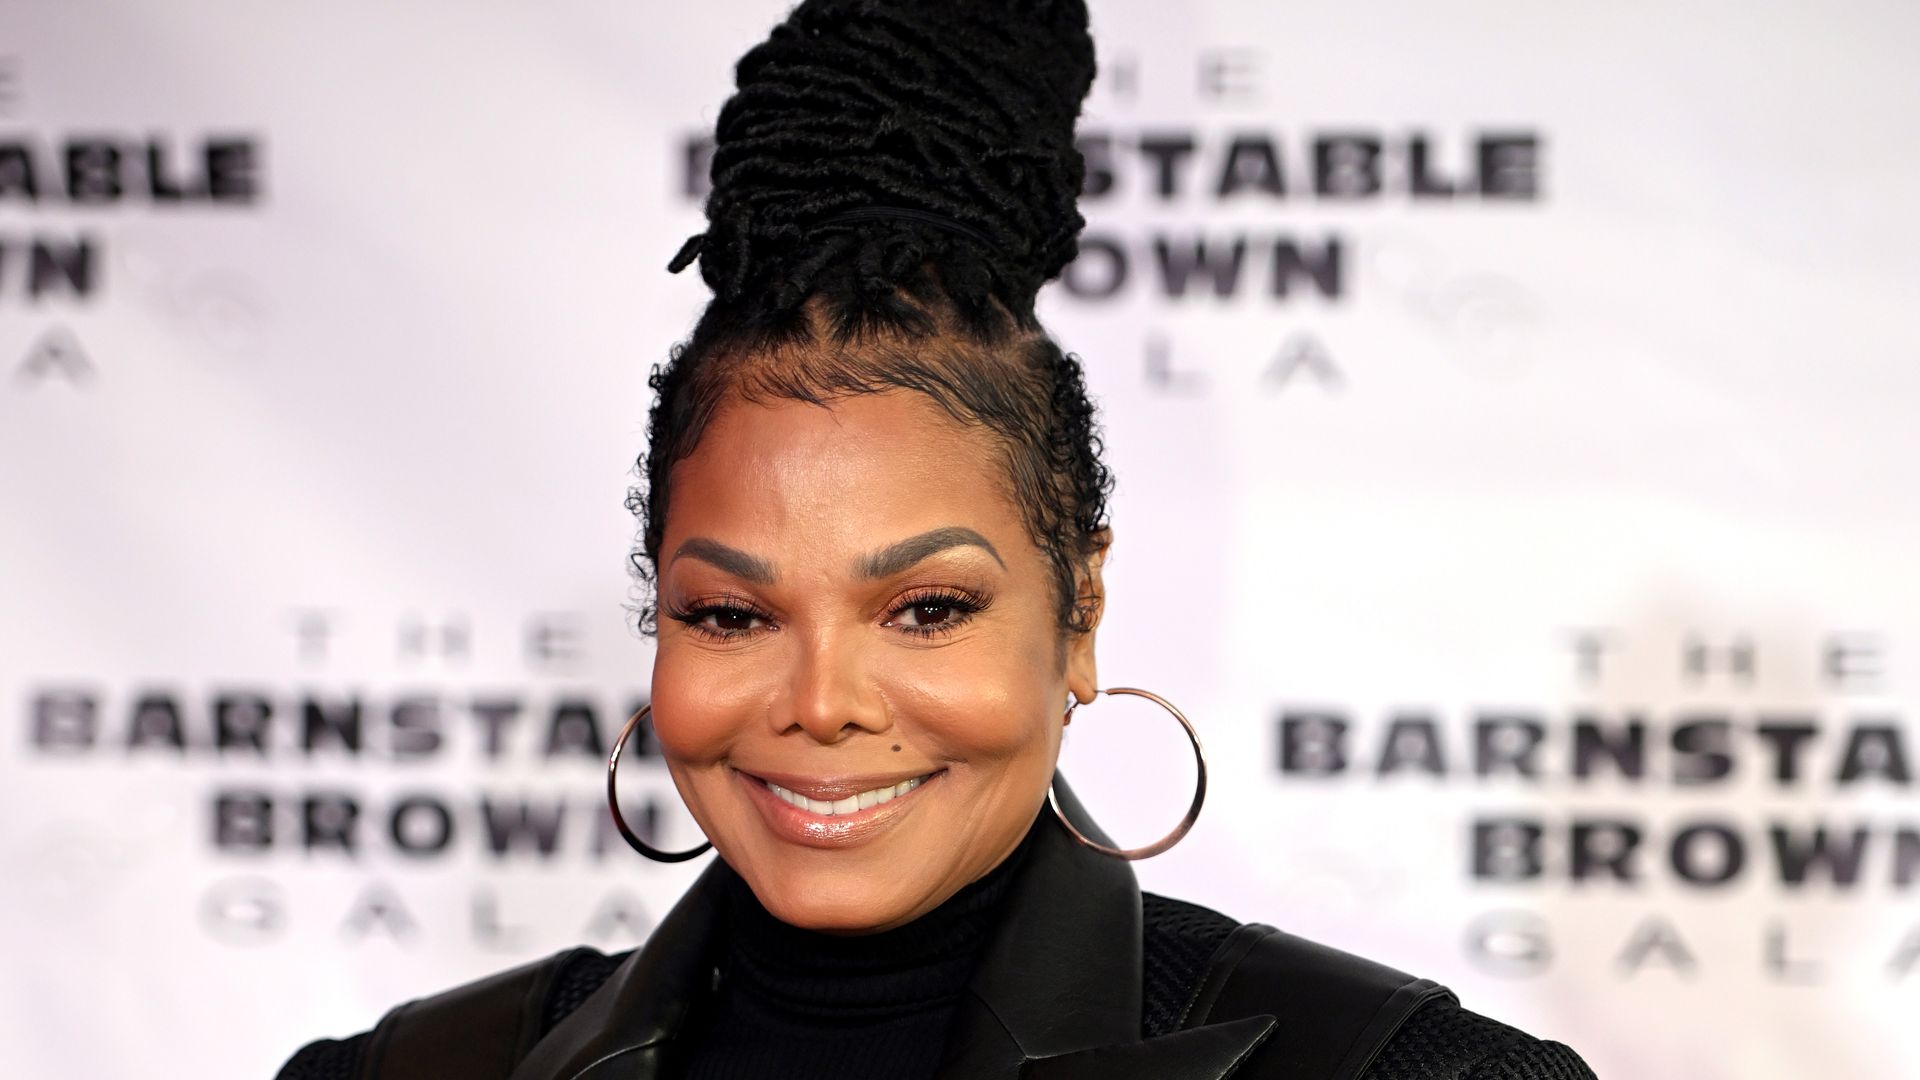 Janet Jackson celebrates personal milestone as Tom Cruise, Katie Holmes, other stars show support – see photos